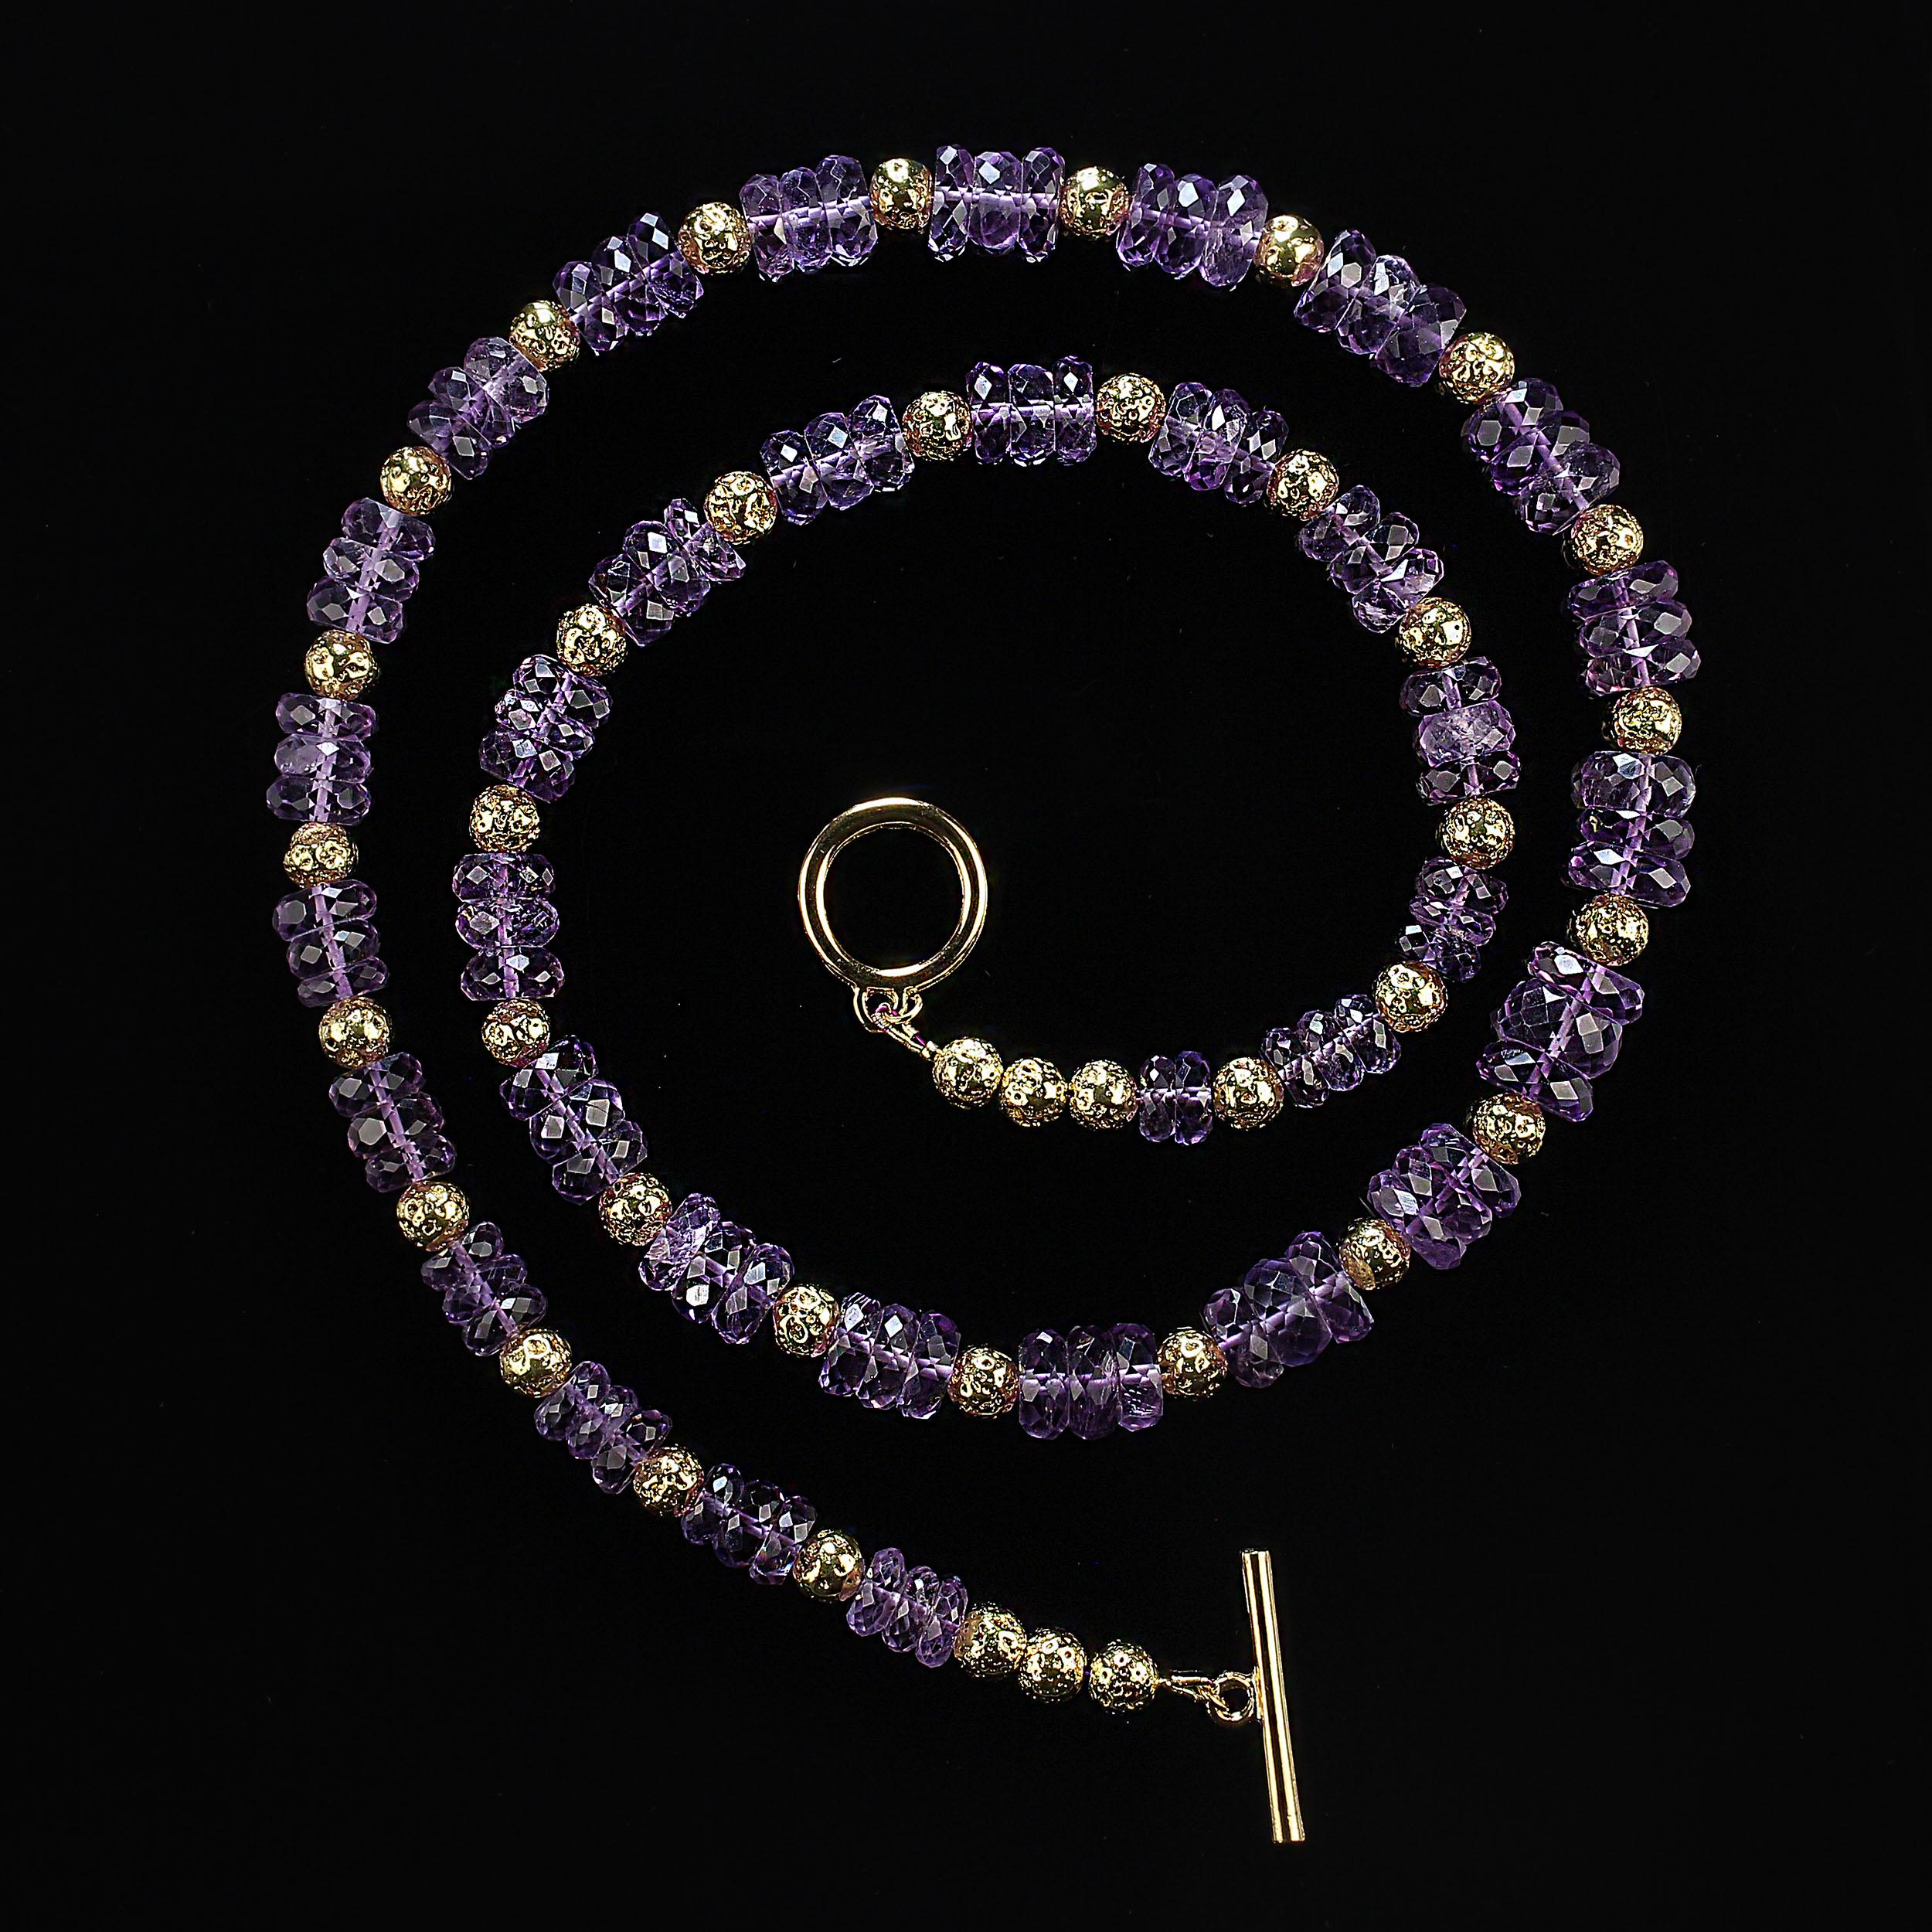 27-inch sparkling lilac amethyst necklace with goldy lava accents and toggle clasp.  This necklace sparkles and pops as the faceted amethyst rondelles catch the light as well as the brilliant lava rock accents between the amethyst.  The amethyst is